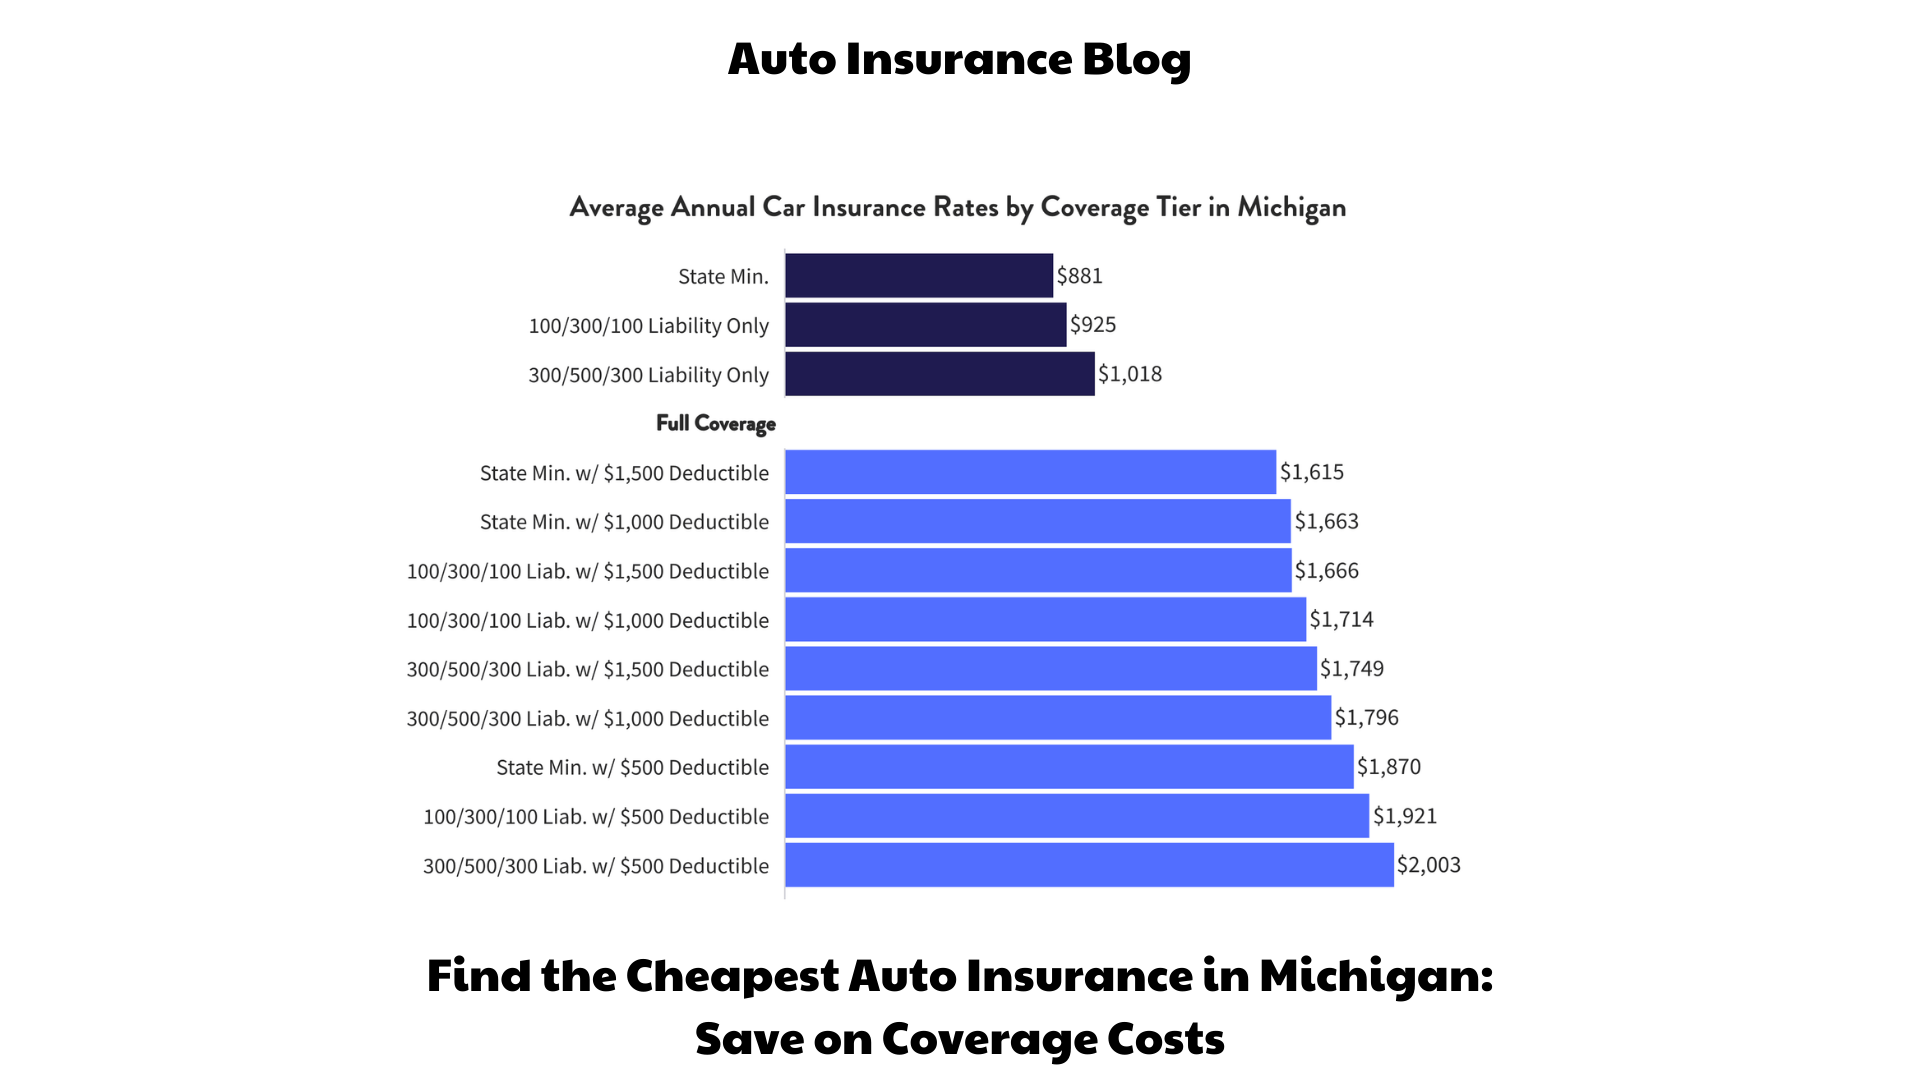 Find the Cheapest Auto Insurance in Michigan Save on Coverage Costs